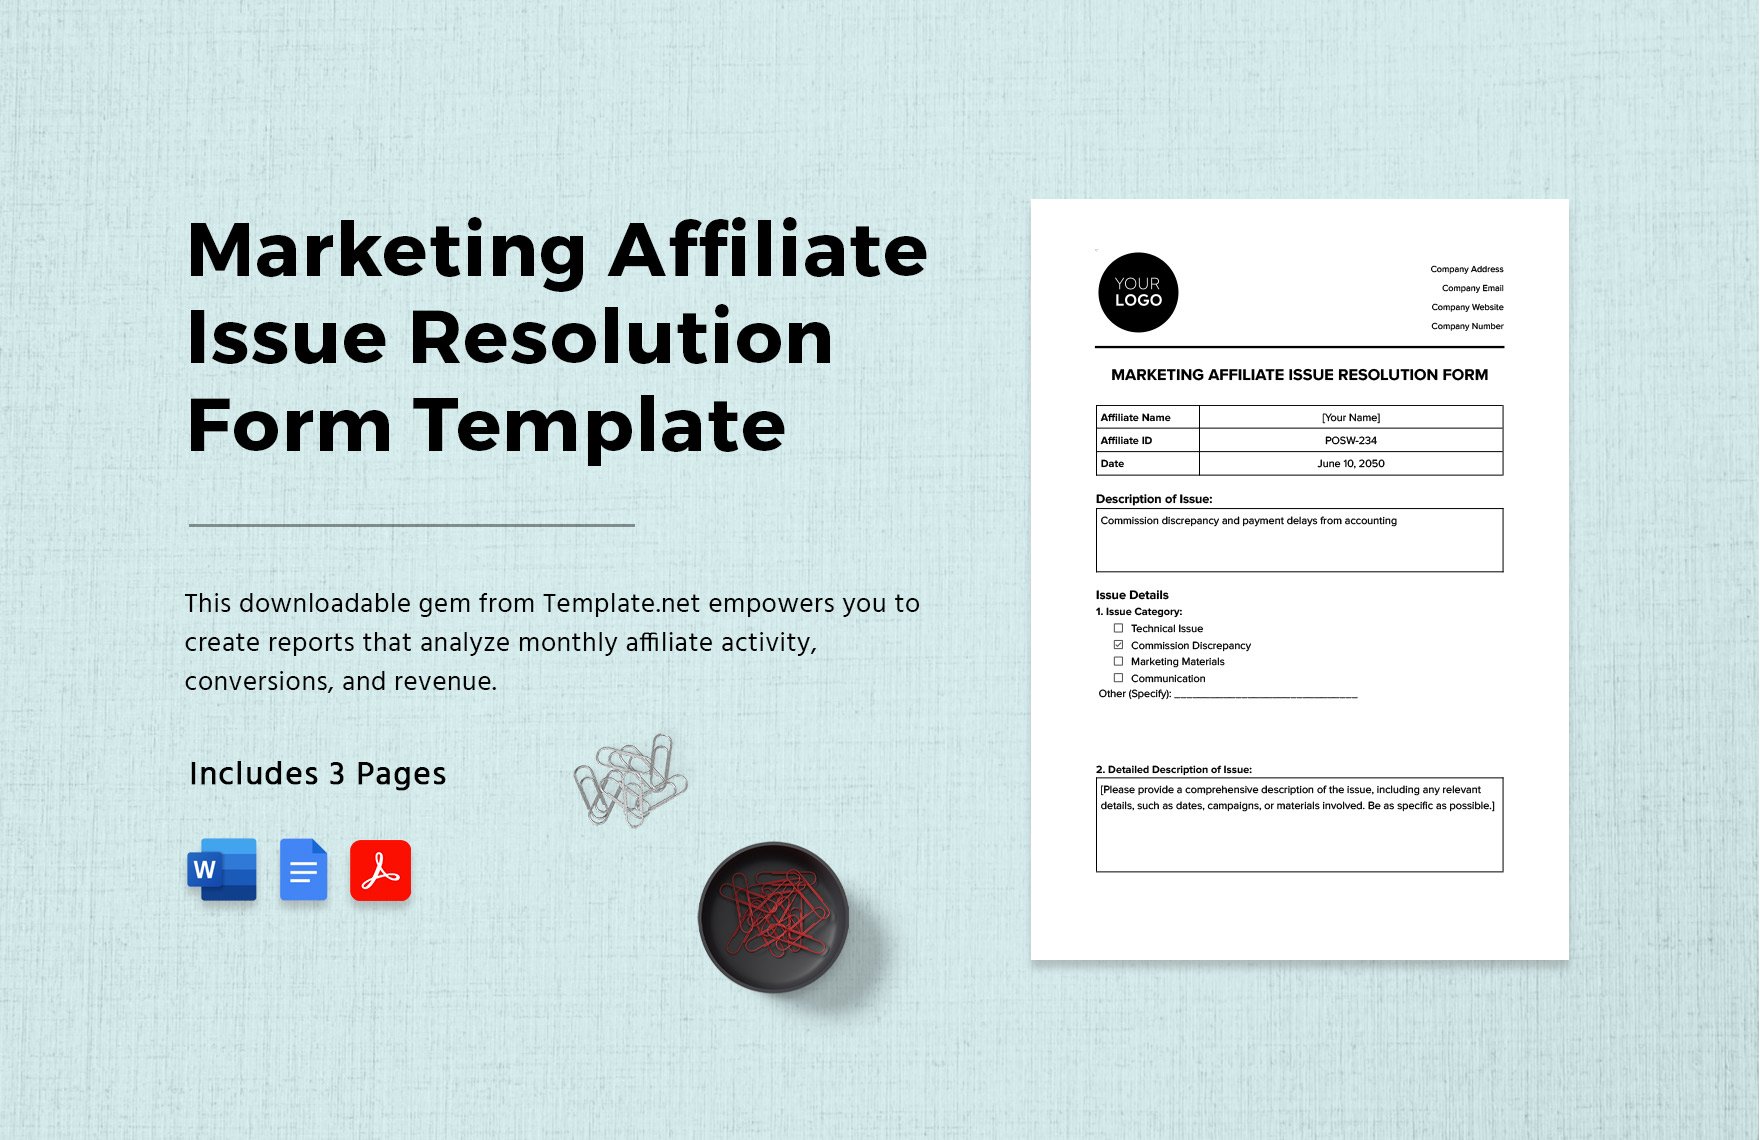 Marketing Affiliate Issue Resolution Form Template in Word, Google Docs, PDF